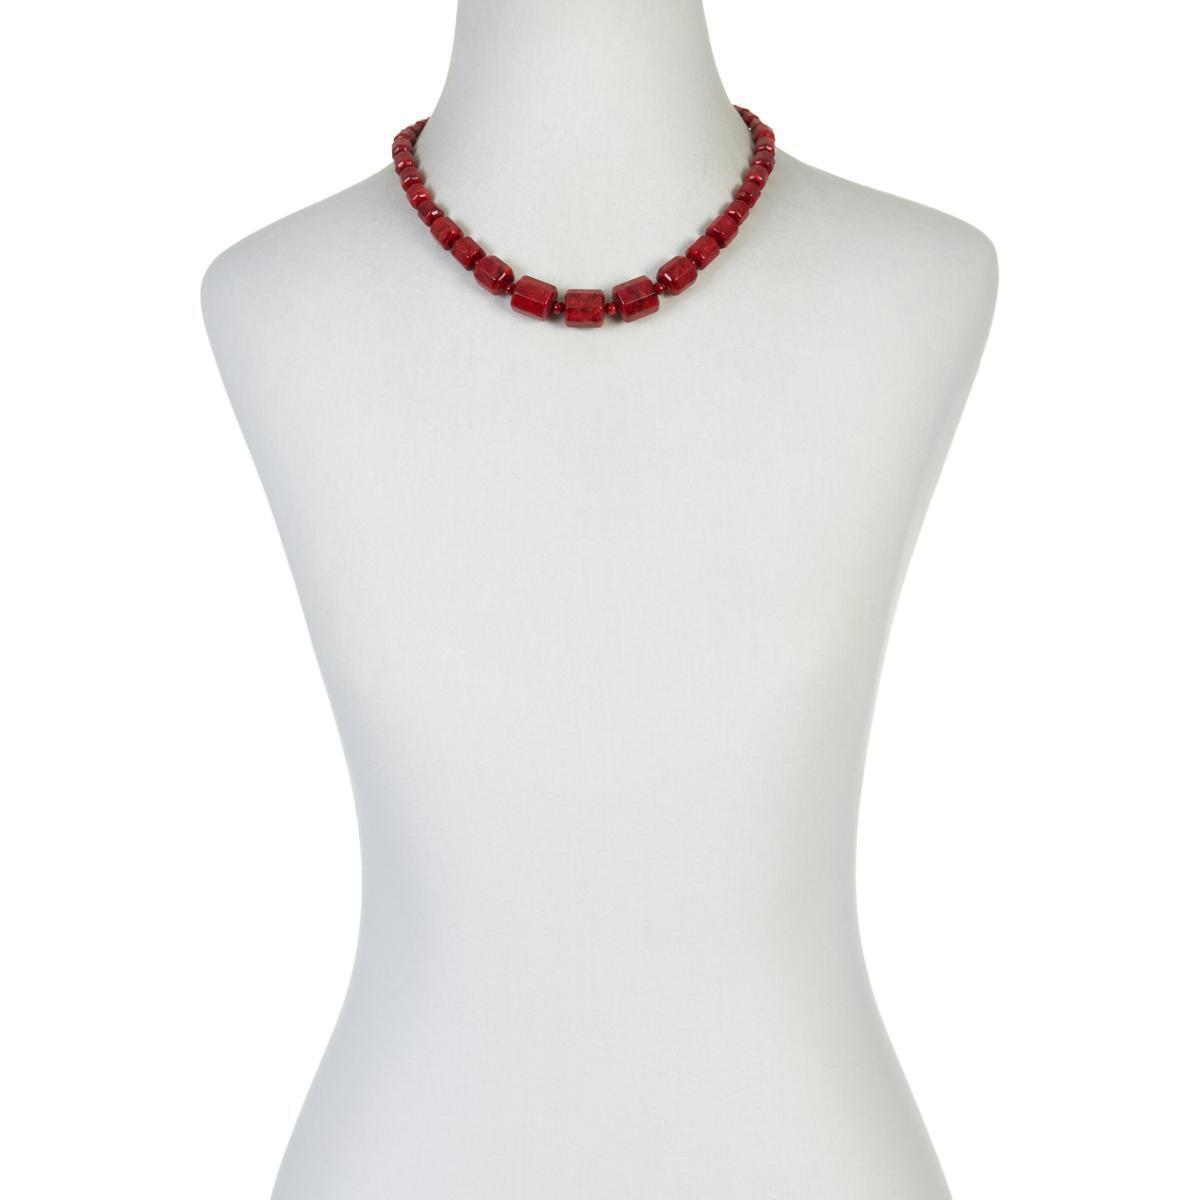 Jay King Sterling Silver Red Coral Rectangular Necklace. 18"